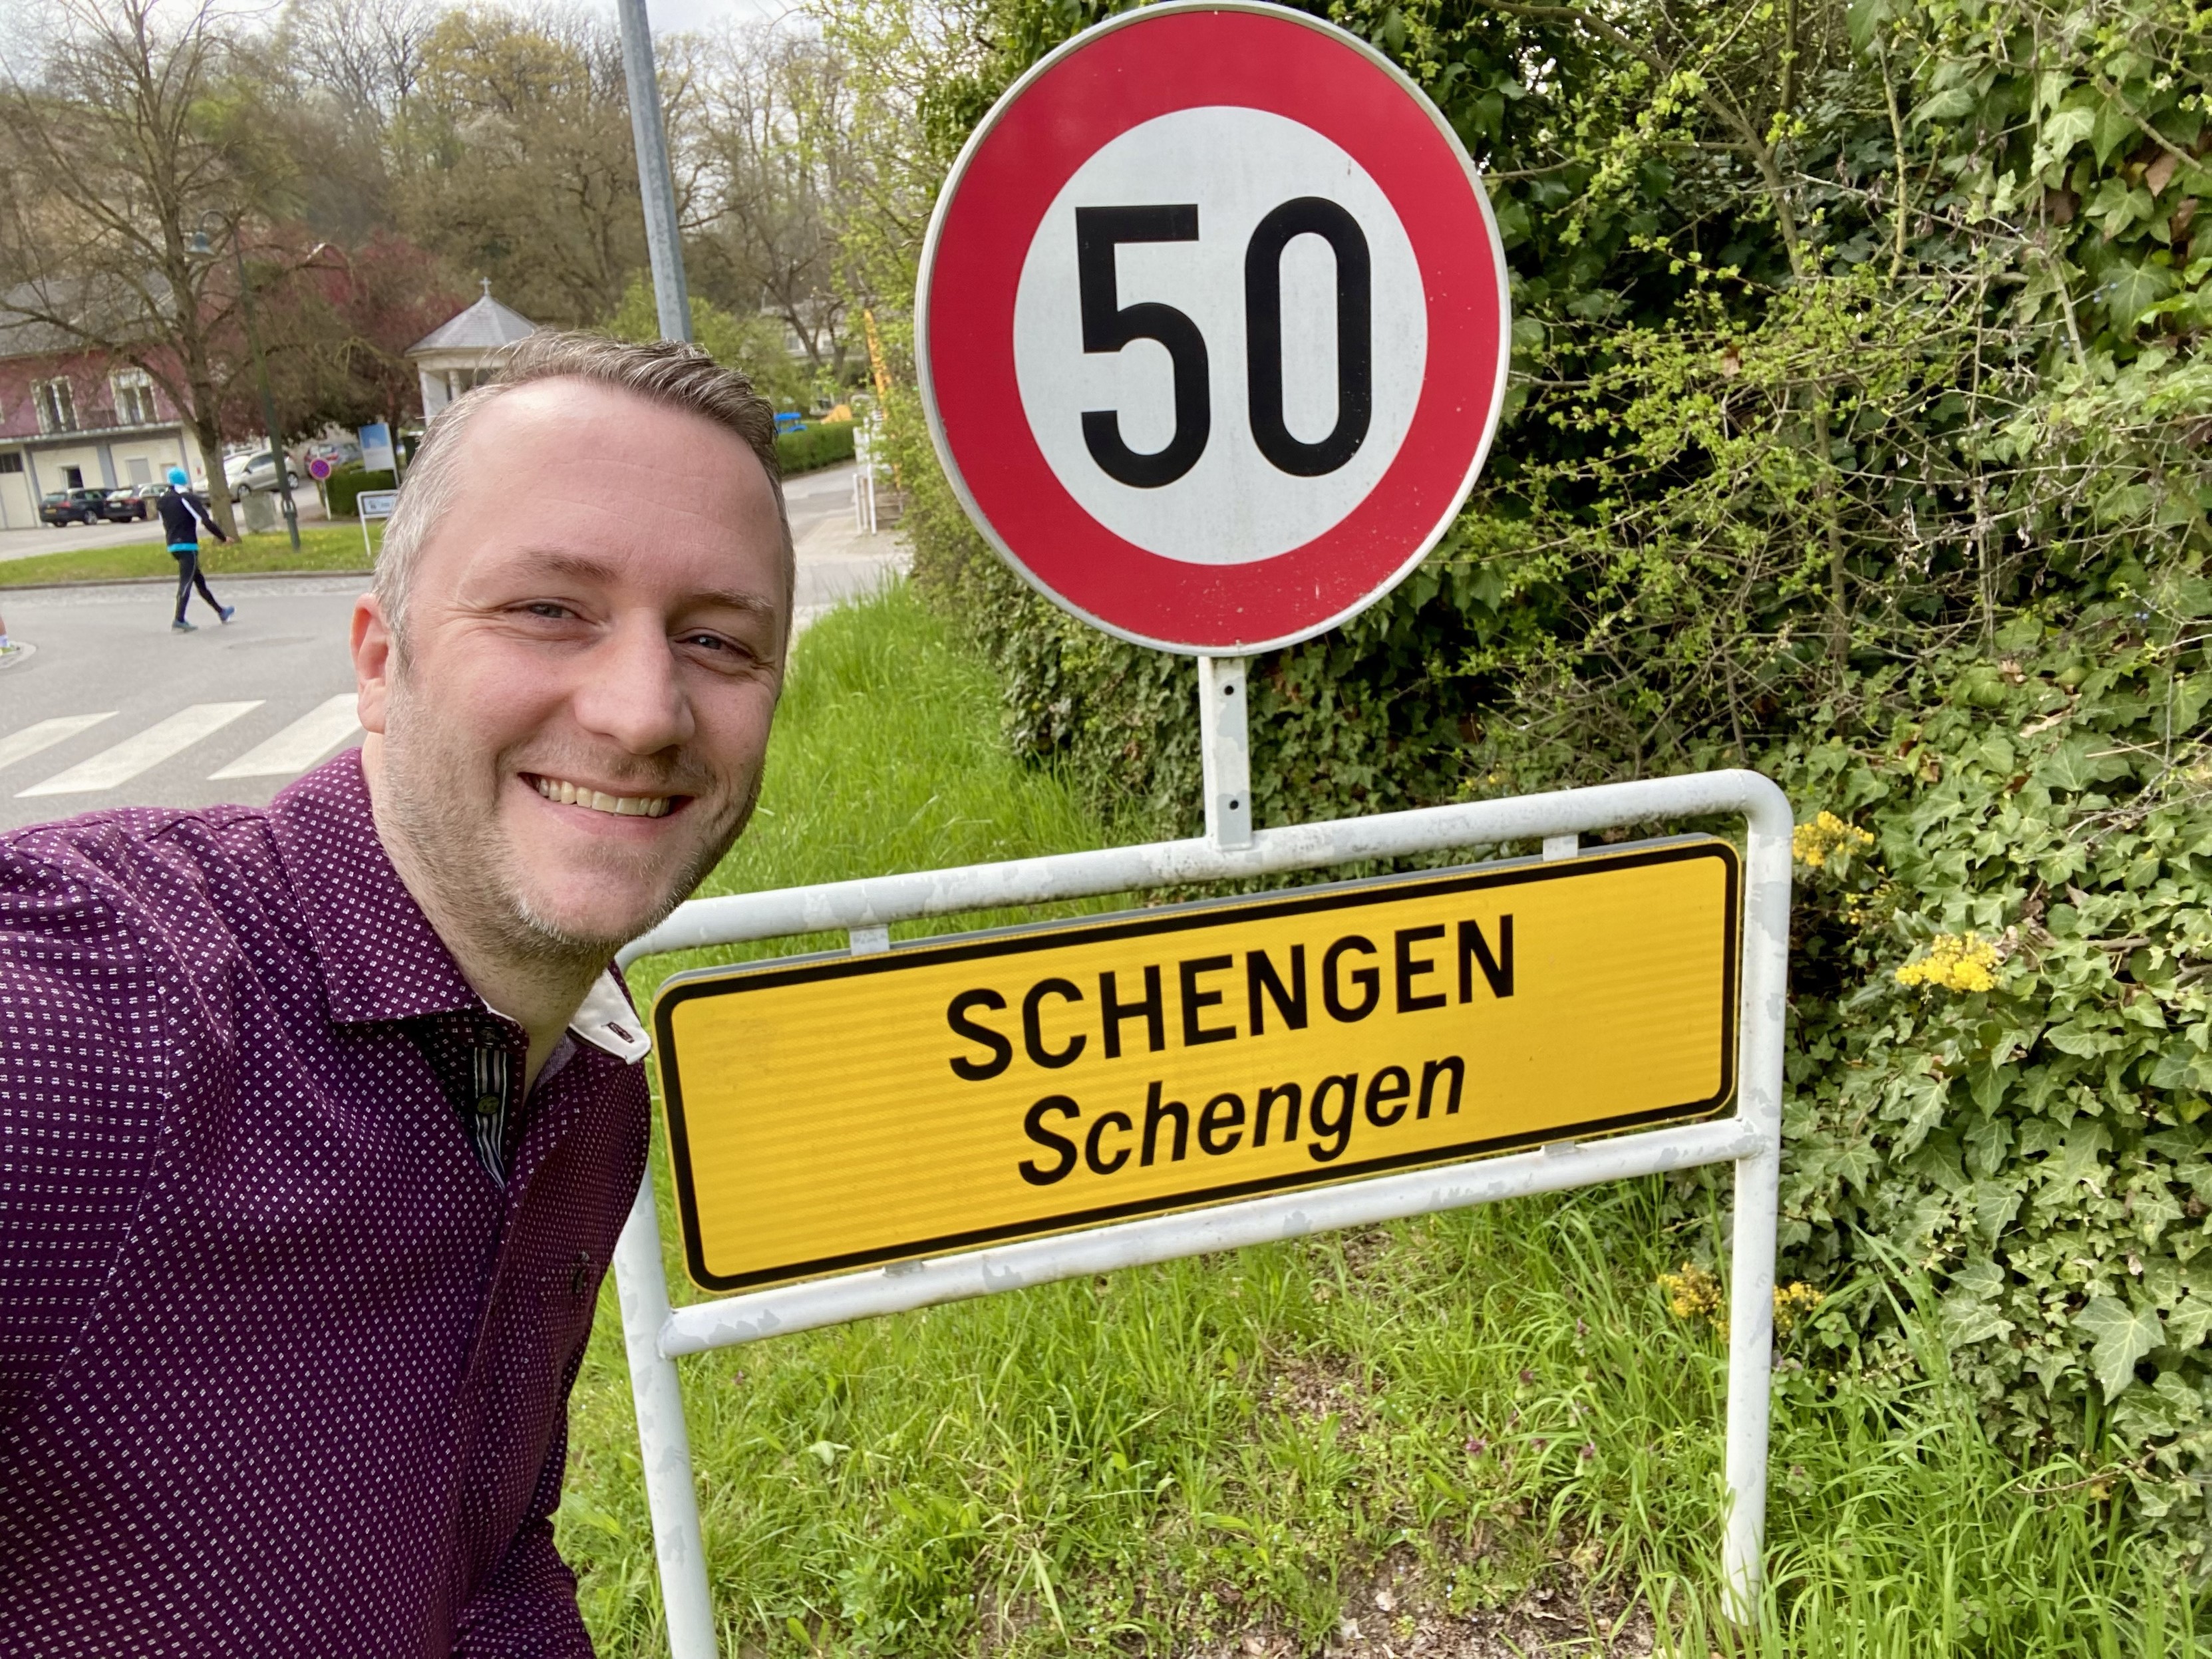 A selfie, I’m wearing a purple/violet top and smile into the camera. I’m standing next to a sign saying we’re about to enter the Luxembourg town of Schengen, an important place in EU history. Above the sign is a another sign indicating a speed limit of 50 km/h. In the background: shrubs, a street, a gazebo and one person crossing the street.